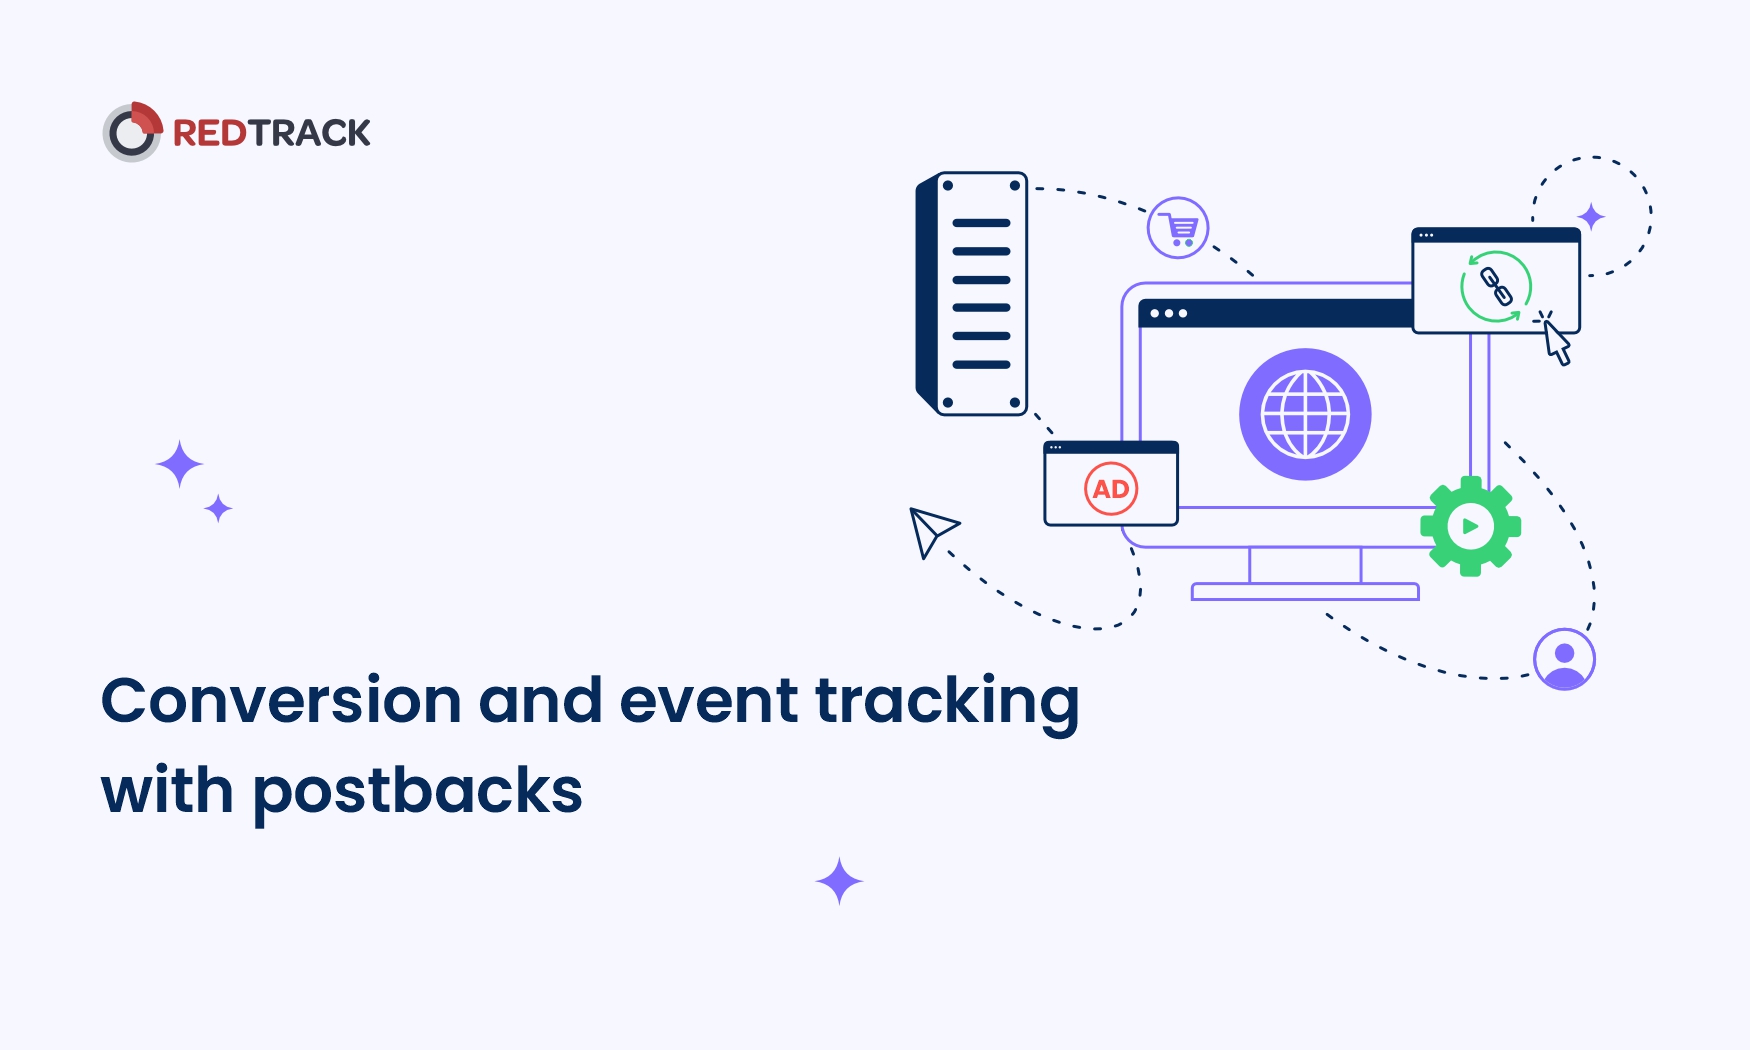 Postbacks: How to Track Conversions and Events